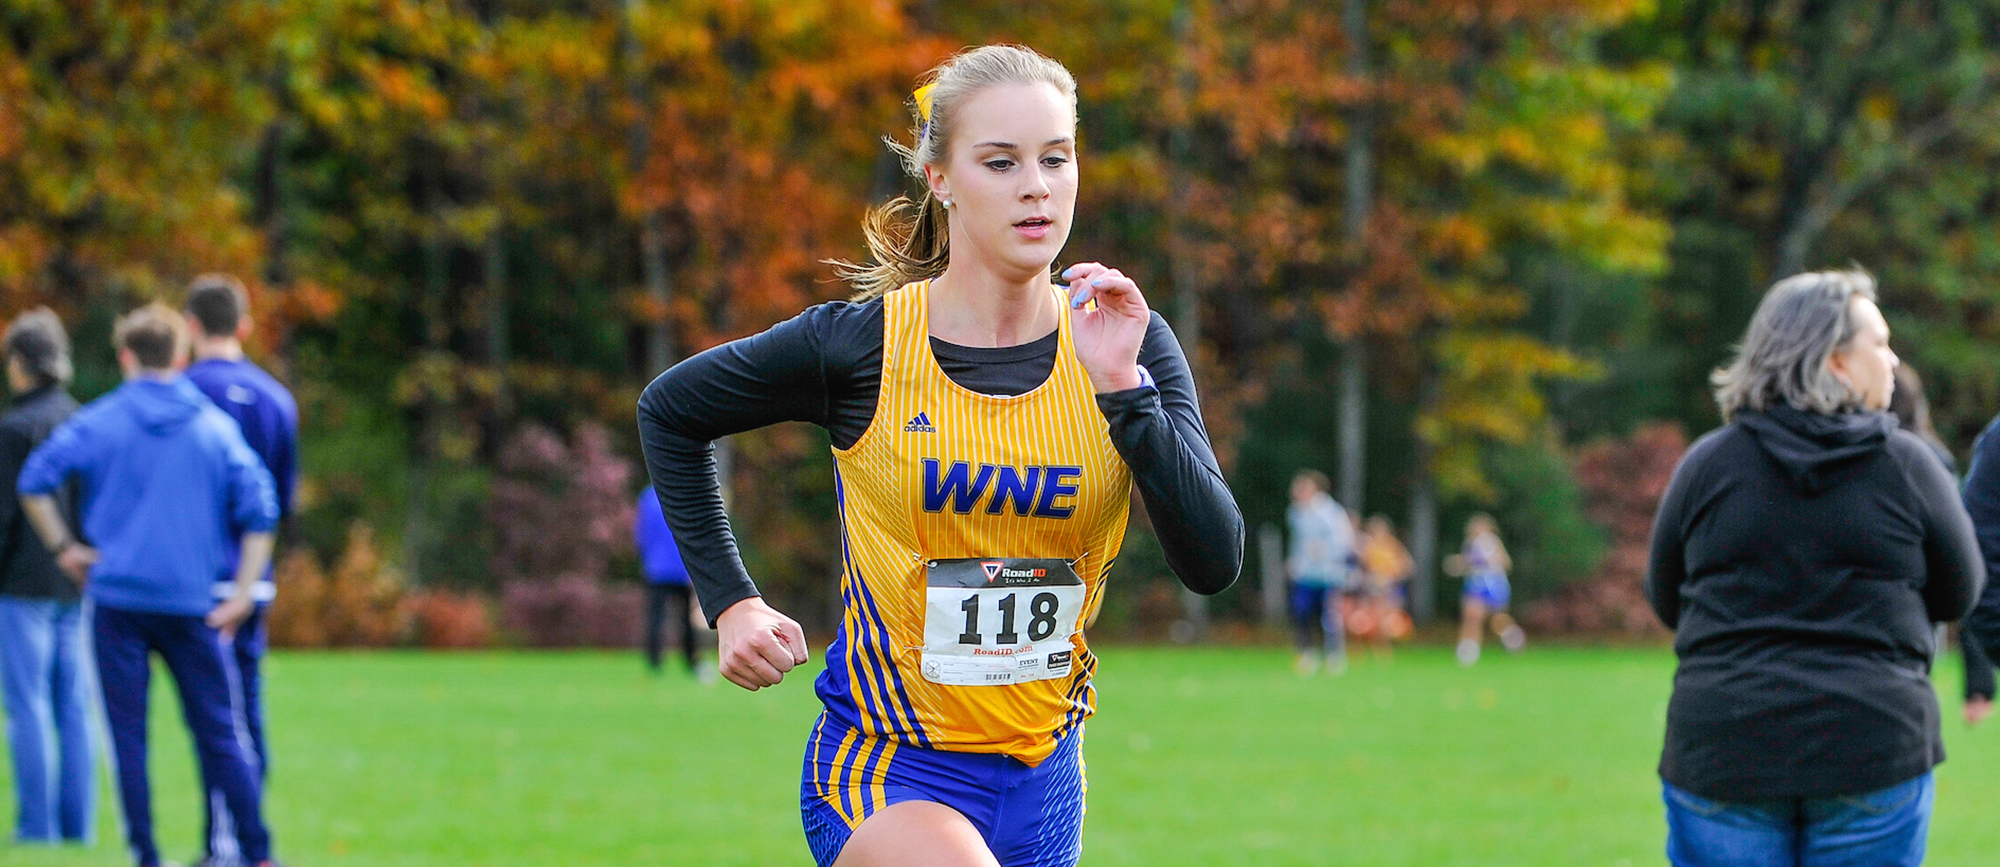 Junior Brooke Townsend led the Golden Bears with her 35th place finish in 19:53.70 on Saturday at the James Earley Invitational.  (Photo by Bill Sharon)